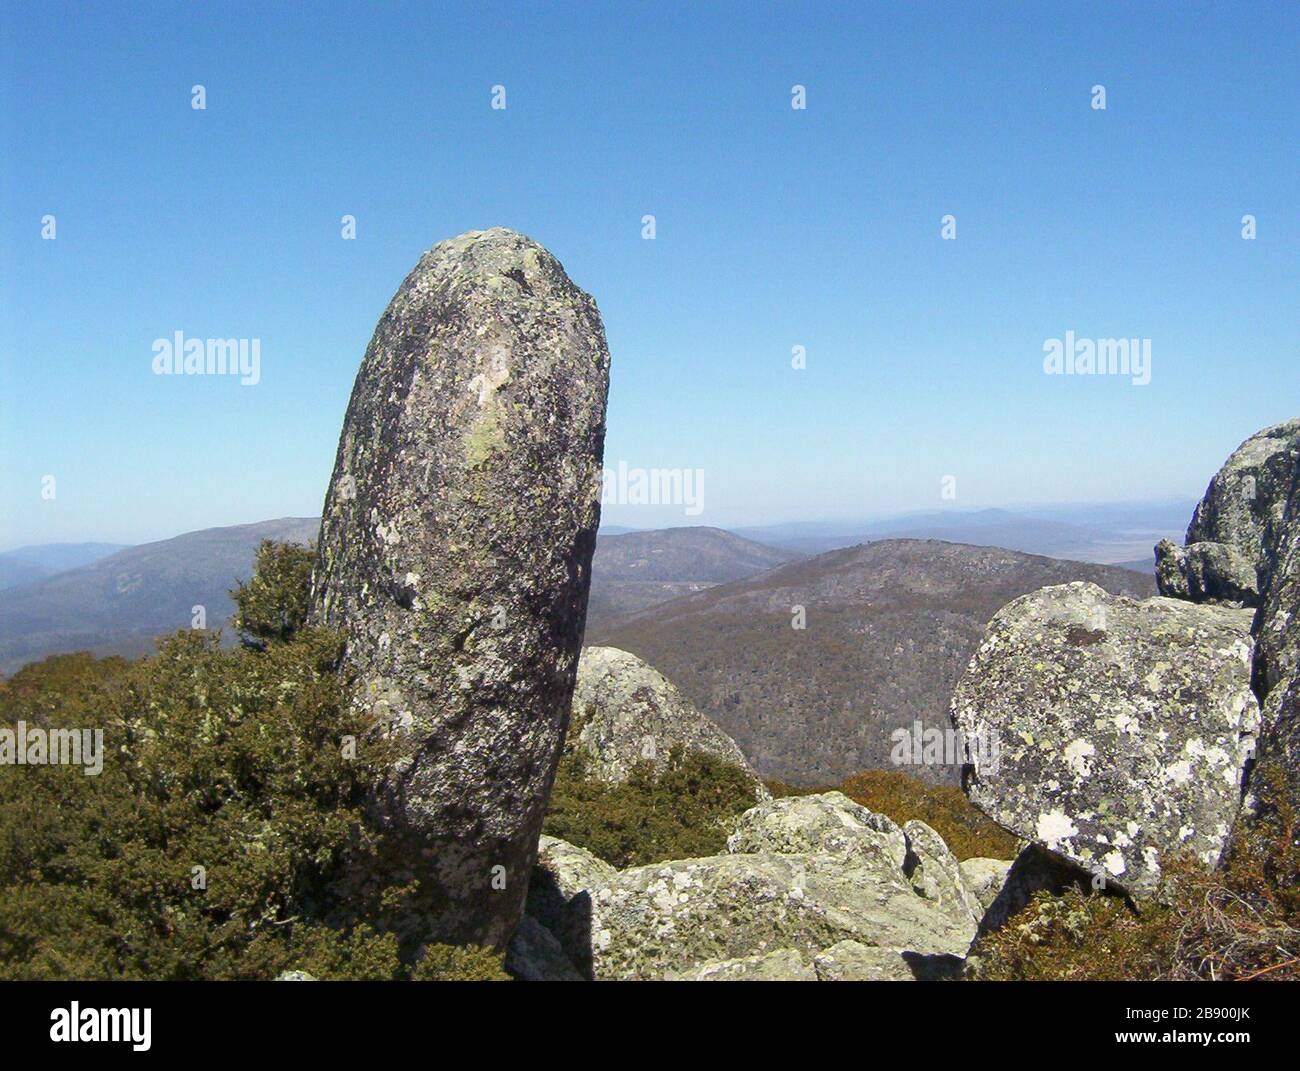 English: Description: A picture taken, from the top of the en:Mount Ginini, en:Namadgi National Source: Own work Date Taken: October 5th 2006 Author: Dfrg.msc Uploader: Dfrg.msc Permission: Given; 4 October 2006 (